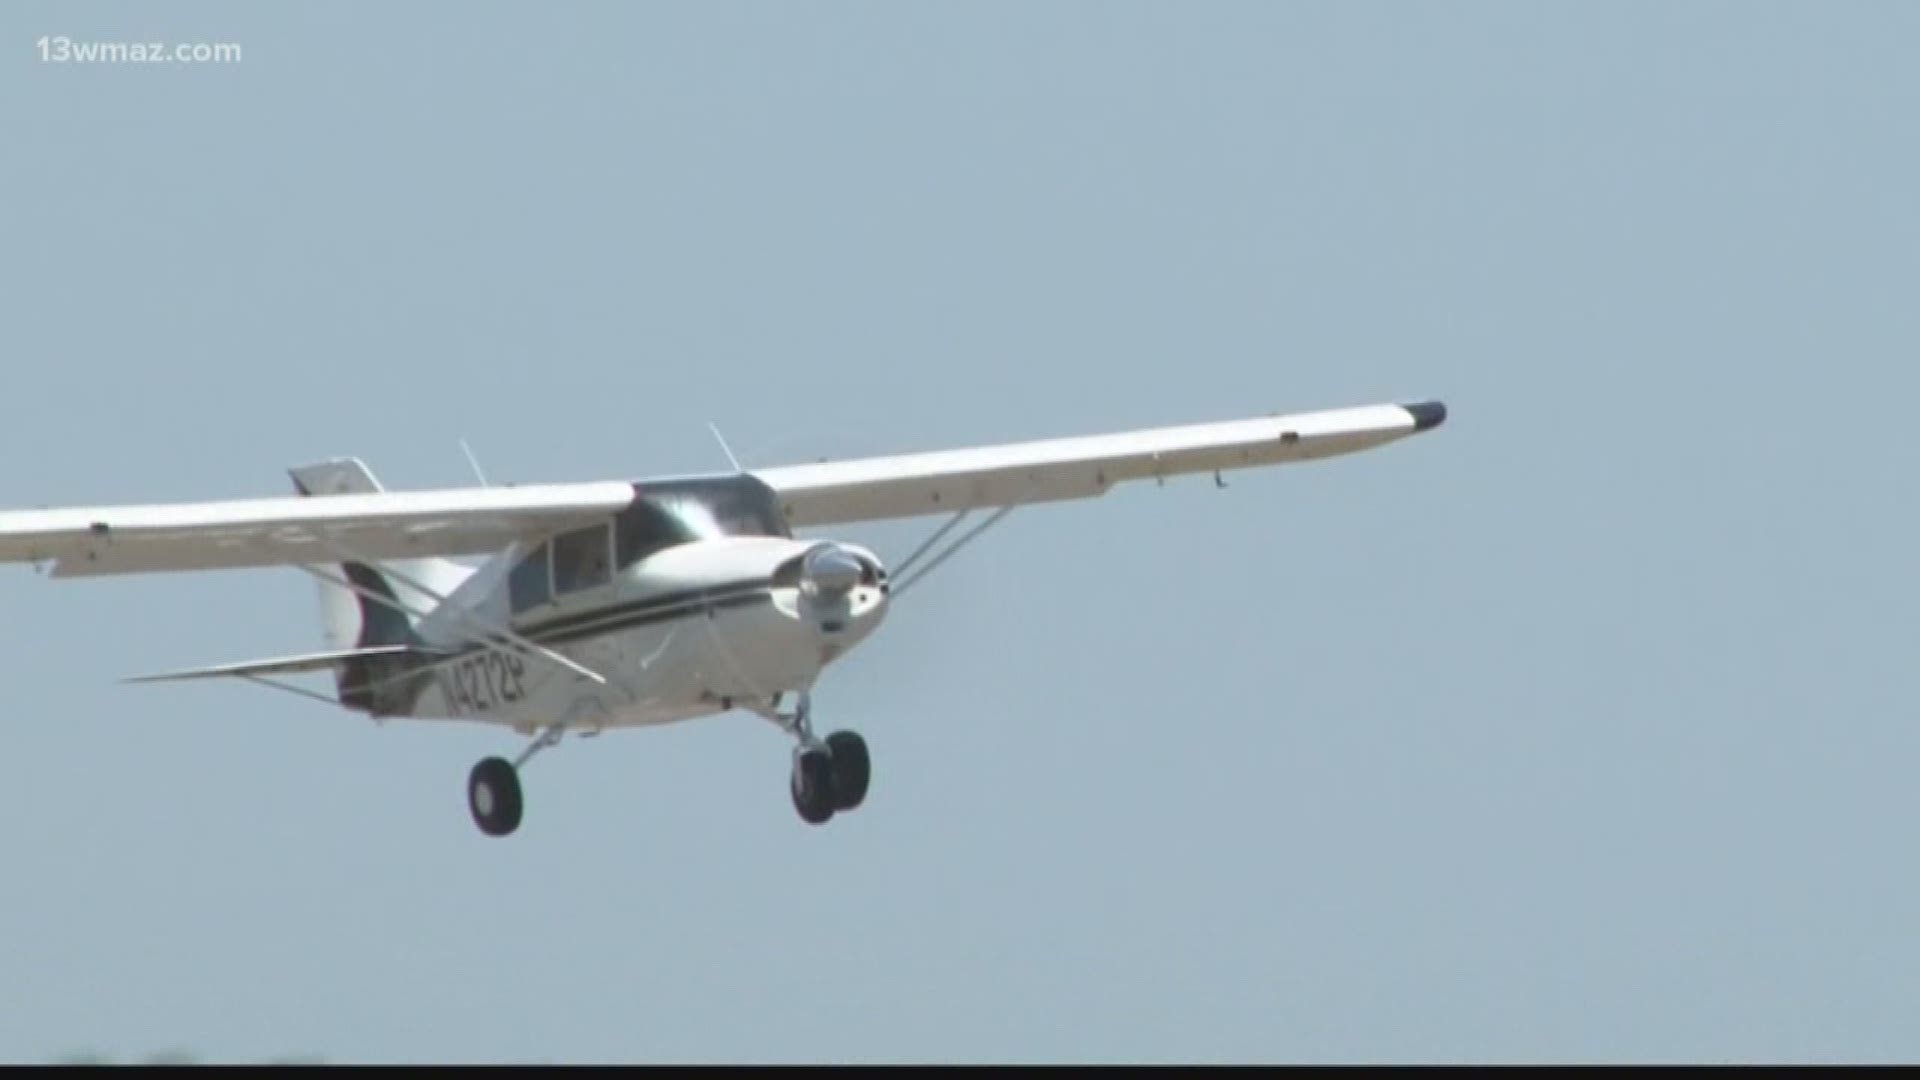 A Warner Robins couple just became the the proud new owners of a flight school. They say they want make learning to fly more accessible to Central Georgians.